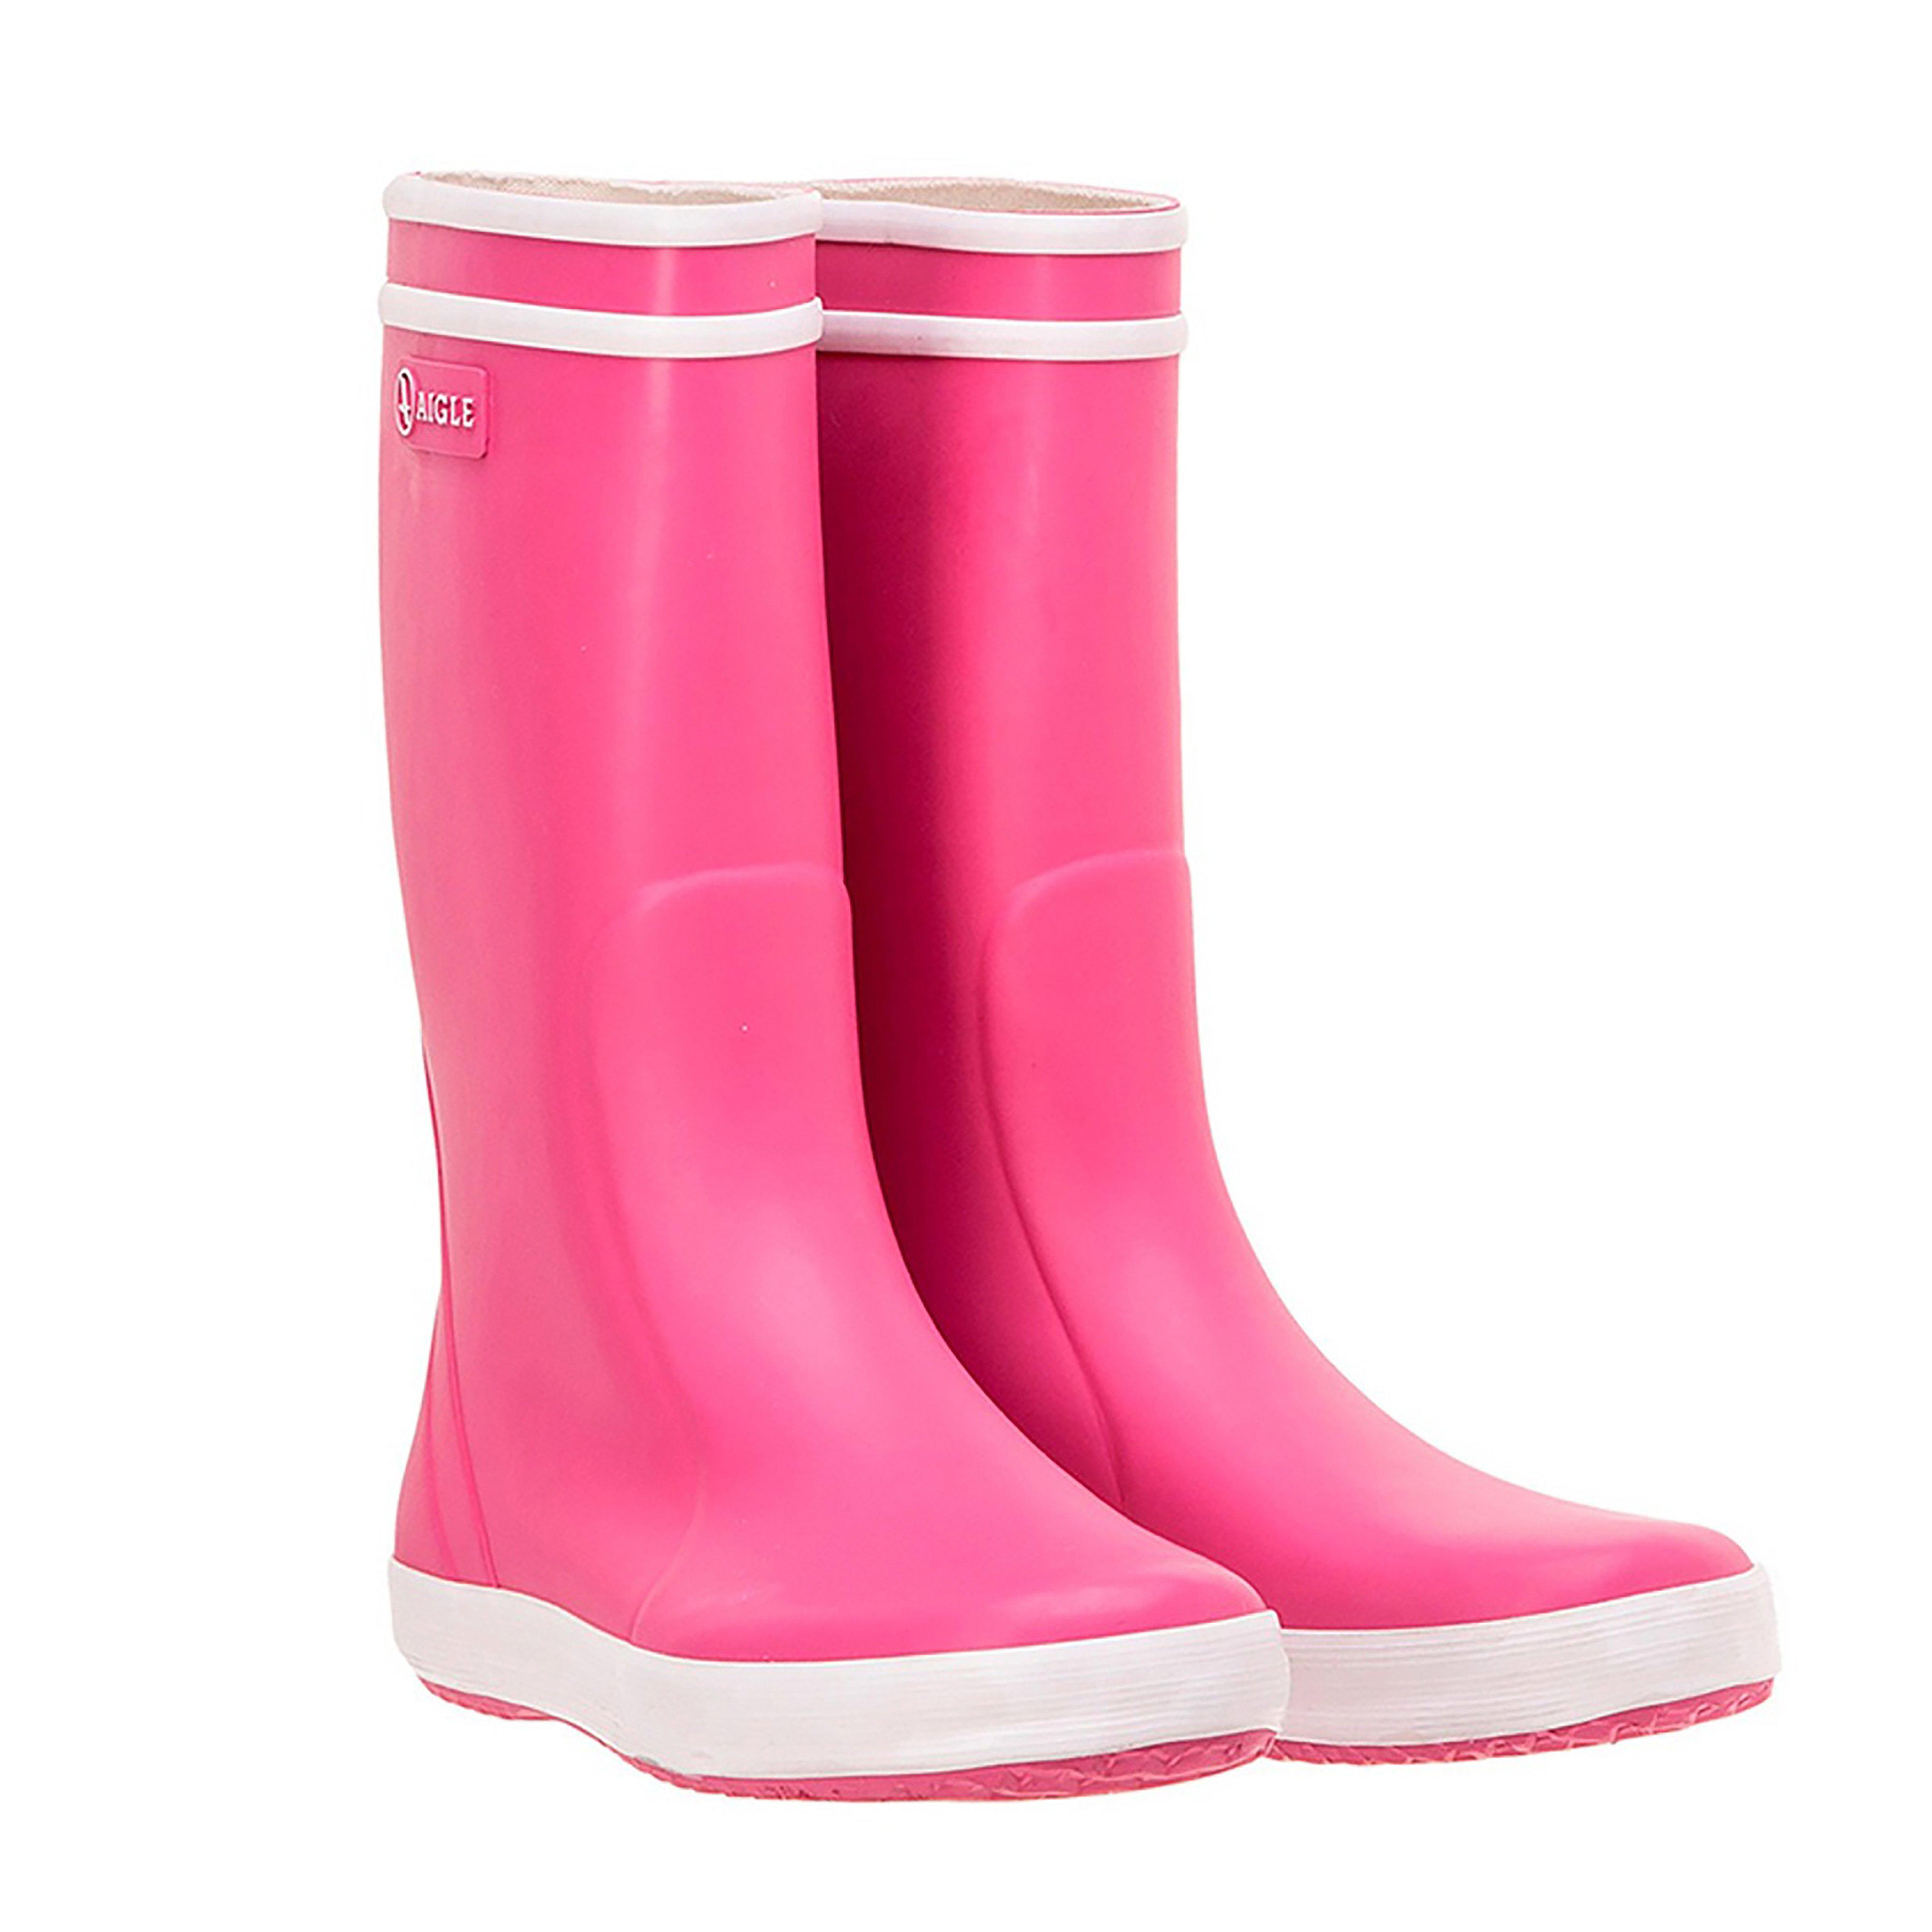 Childrens Lolly Pop Rain Boots New Rose